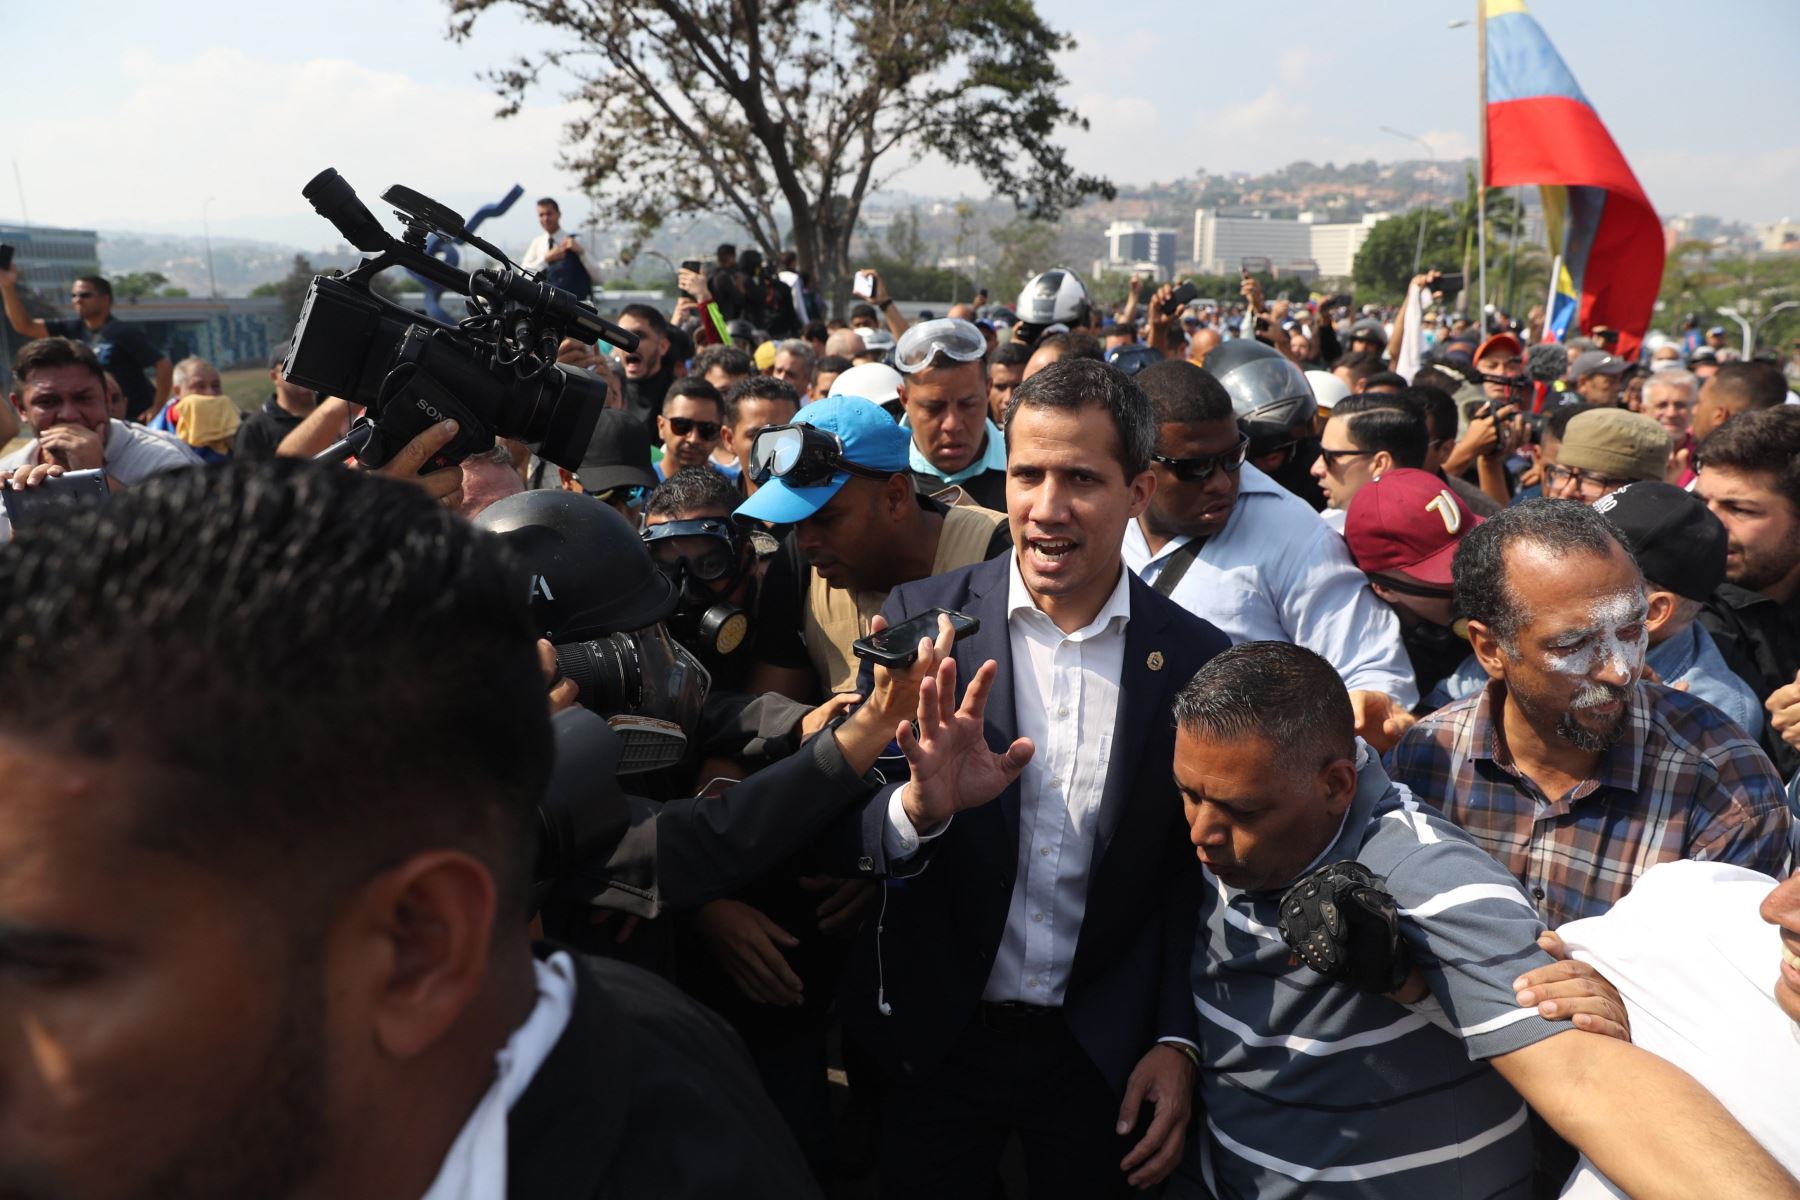 Lima Group condemns violence acts against Venezuela’s opposition leader Guaido